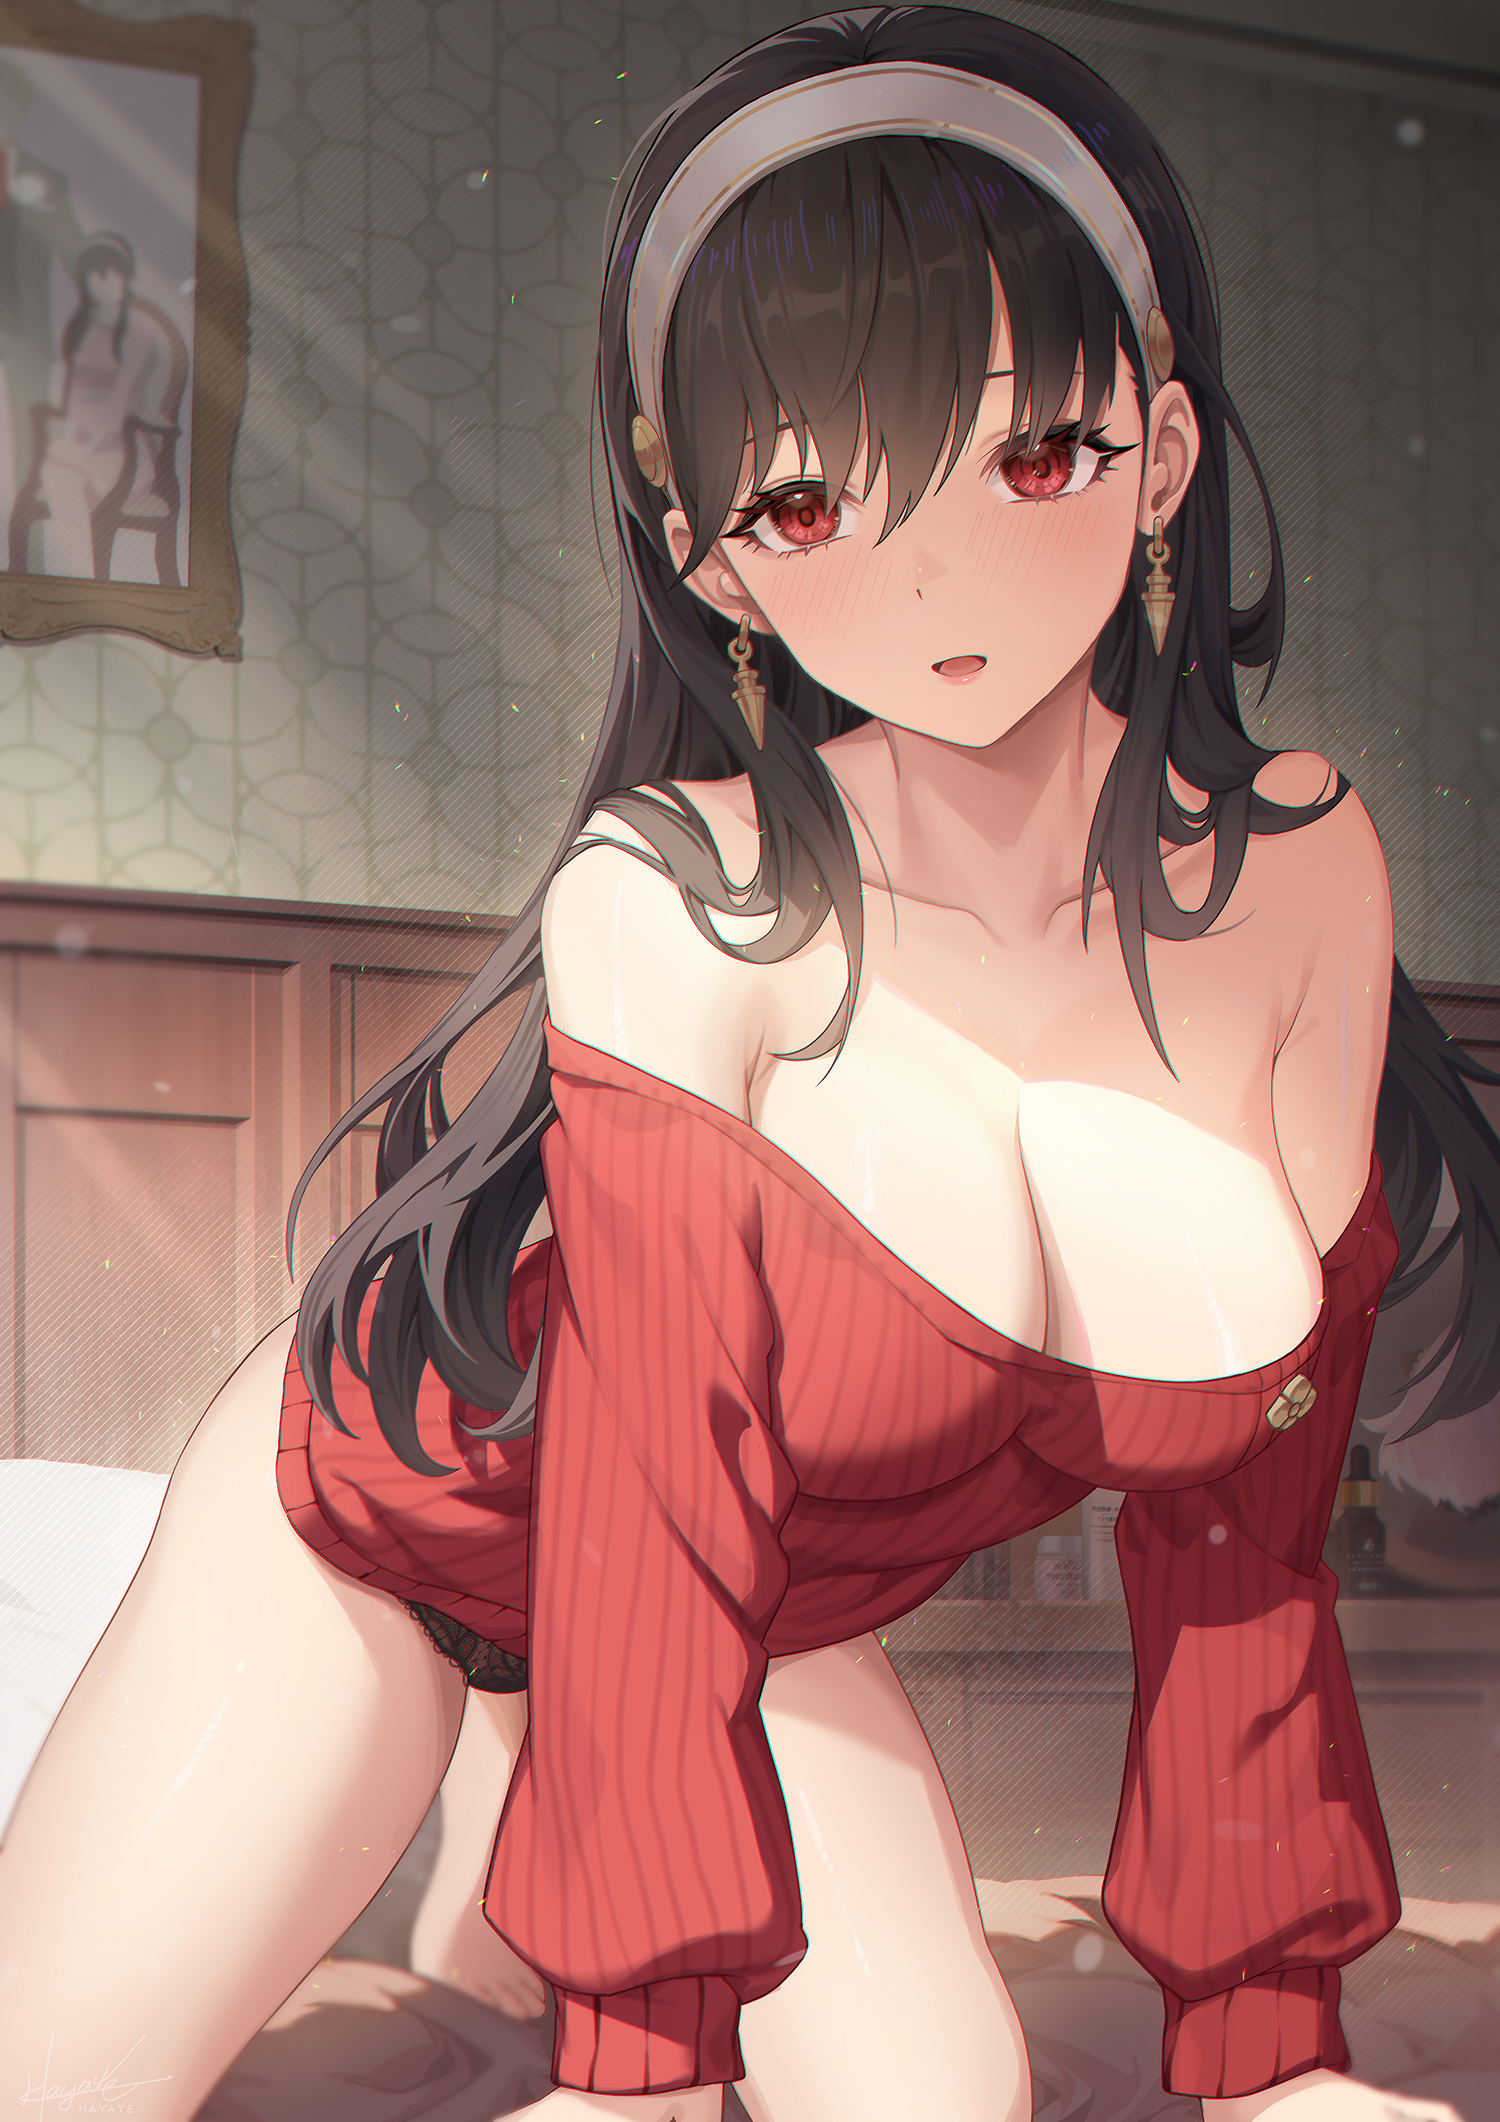 Anime 1500x2122 anime anime girls Spy x Family Yor Forger bent over cleavage bare shoulders sweater artwork Leaf98k